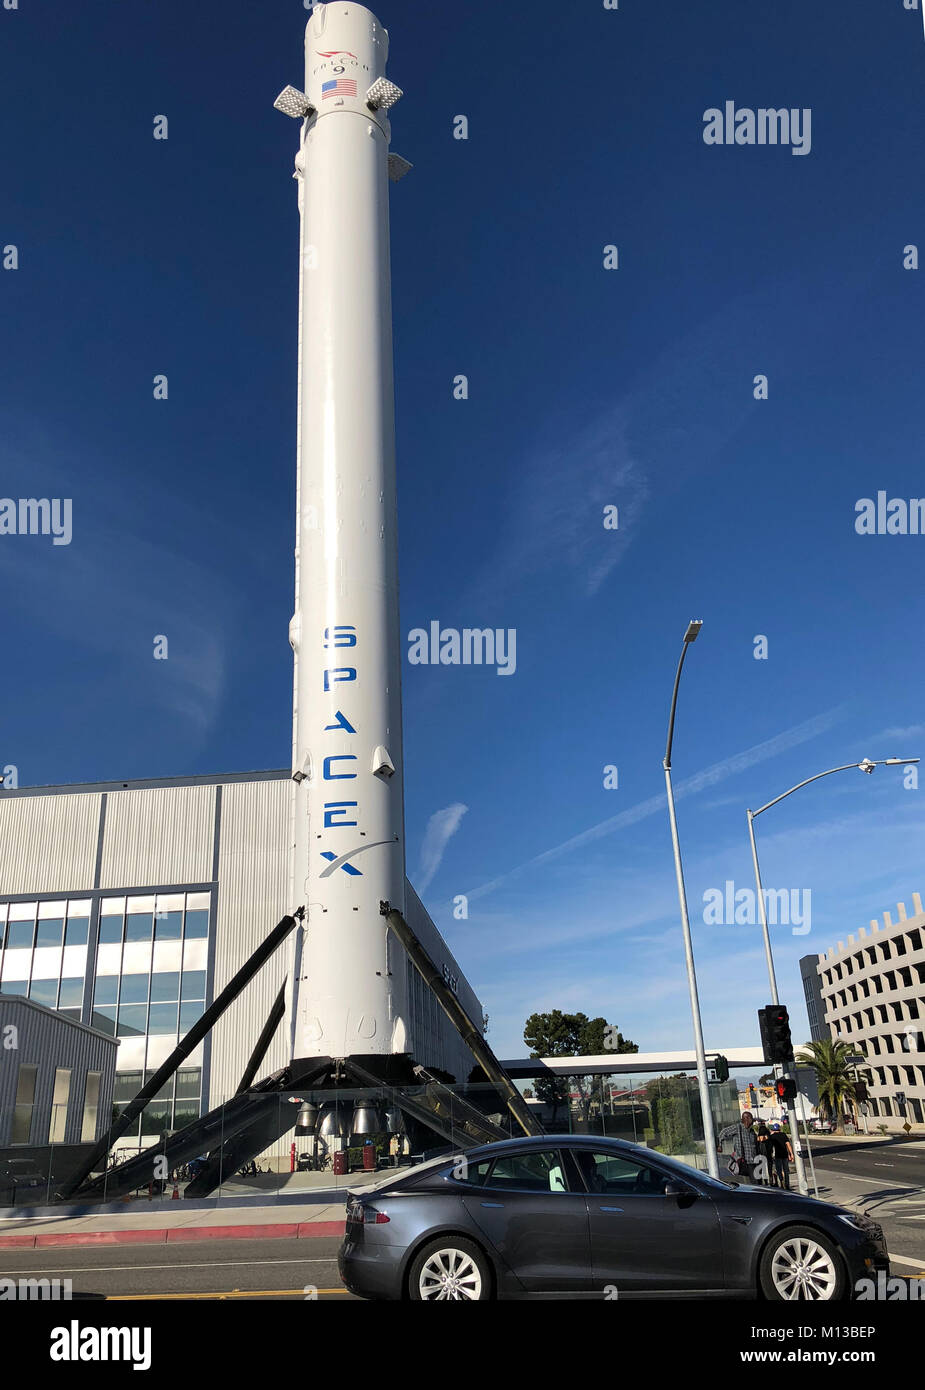 Falcon 9 rocket in front of SpaceX headquarters, located in Hawthorne, California on Jan. 13, 2018. The two-stage-to-orbit medium lift launch vehicle can lift payloads of up to 22,800 kilograms (50,300 lb) to low Earth orbit. - NO WIRE SERVICE - Photo: Christoph Dernbach/dpa Stock Photo